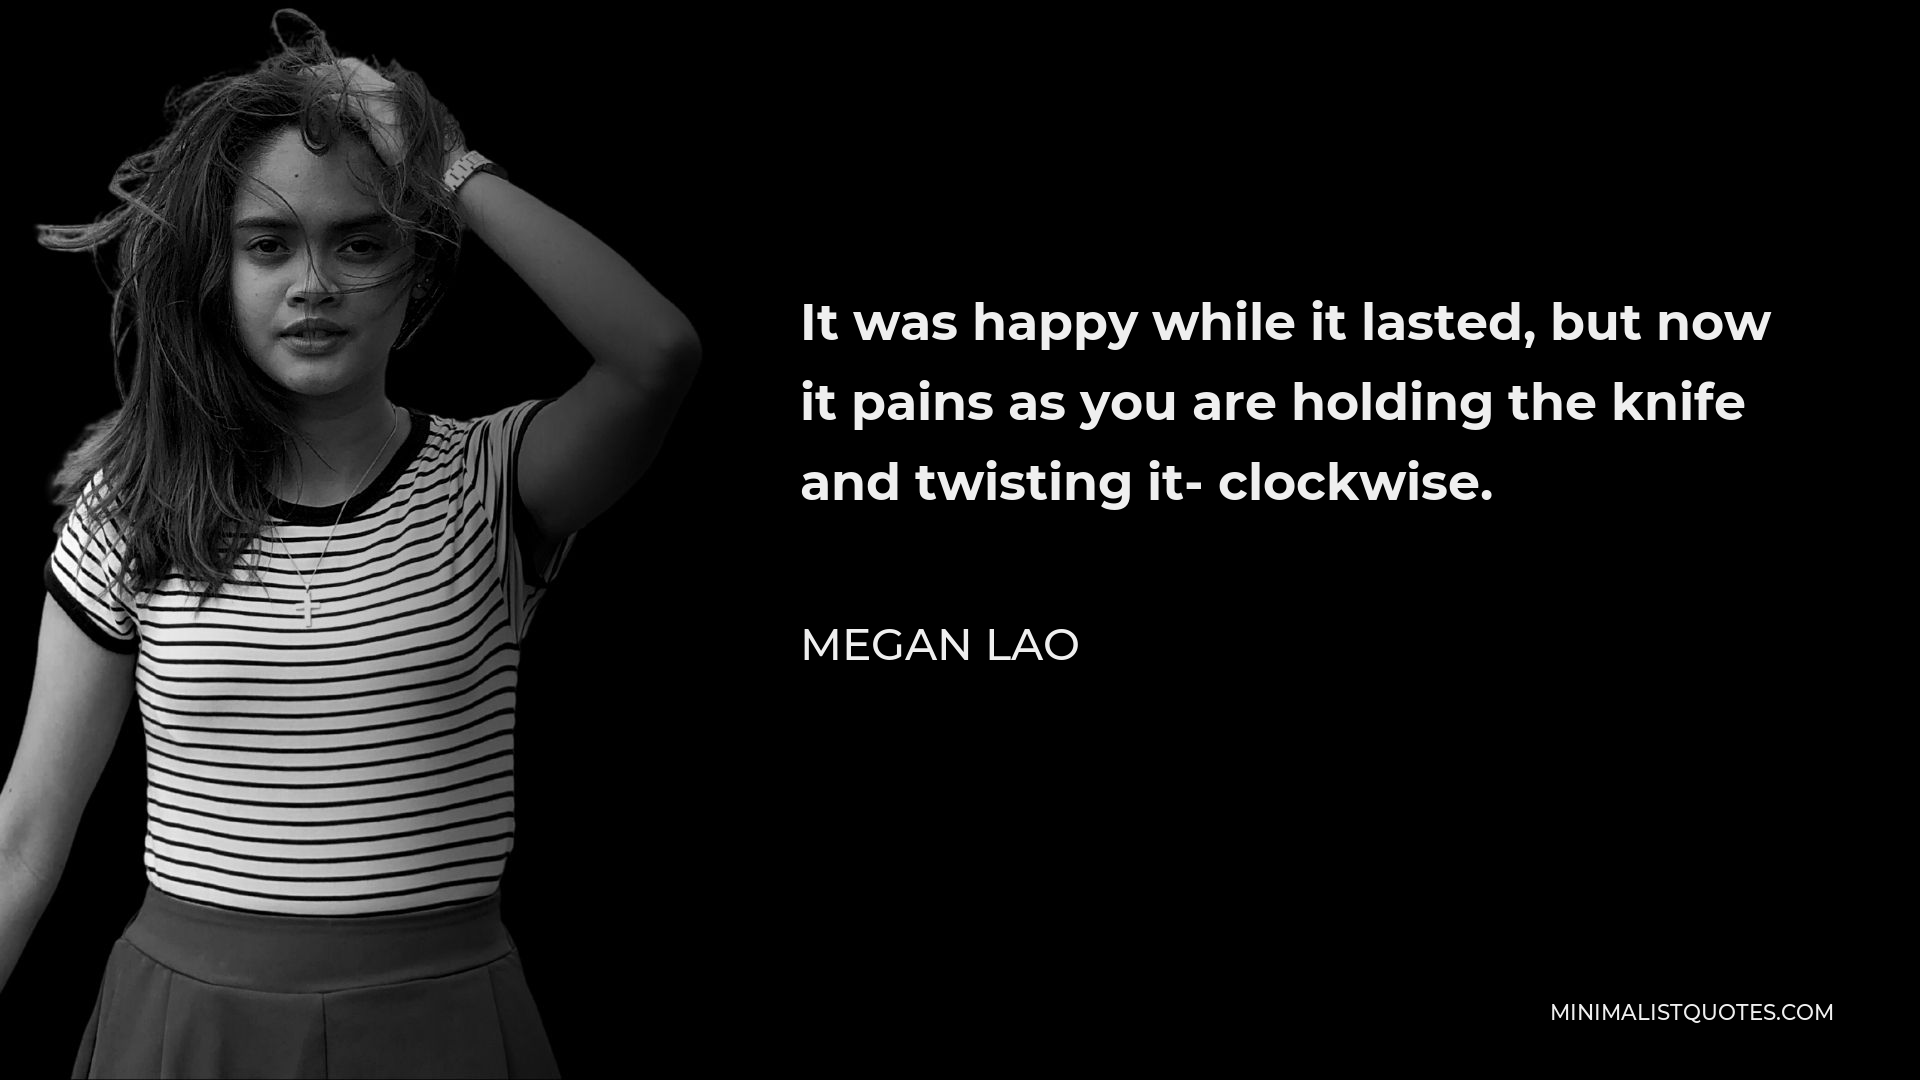 Megan Lao Quote - It was happy while it lasted, but now it pains as you are holding the knife and twisting it- clockwise.